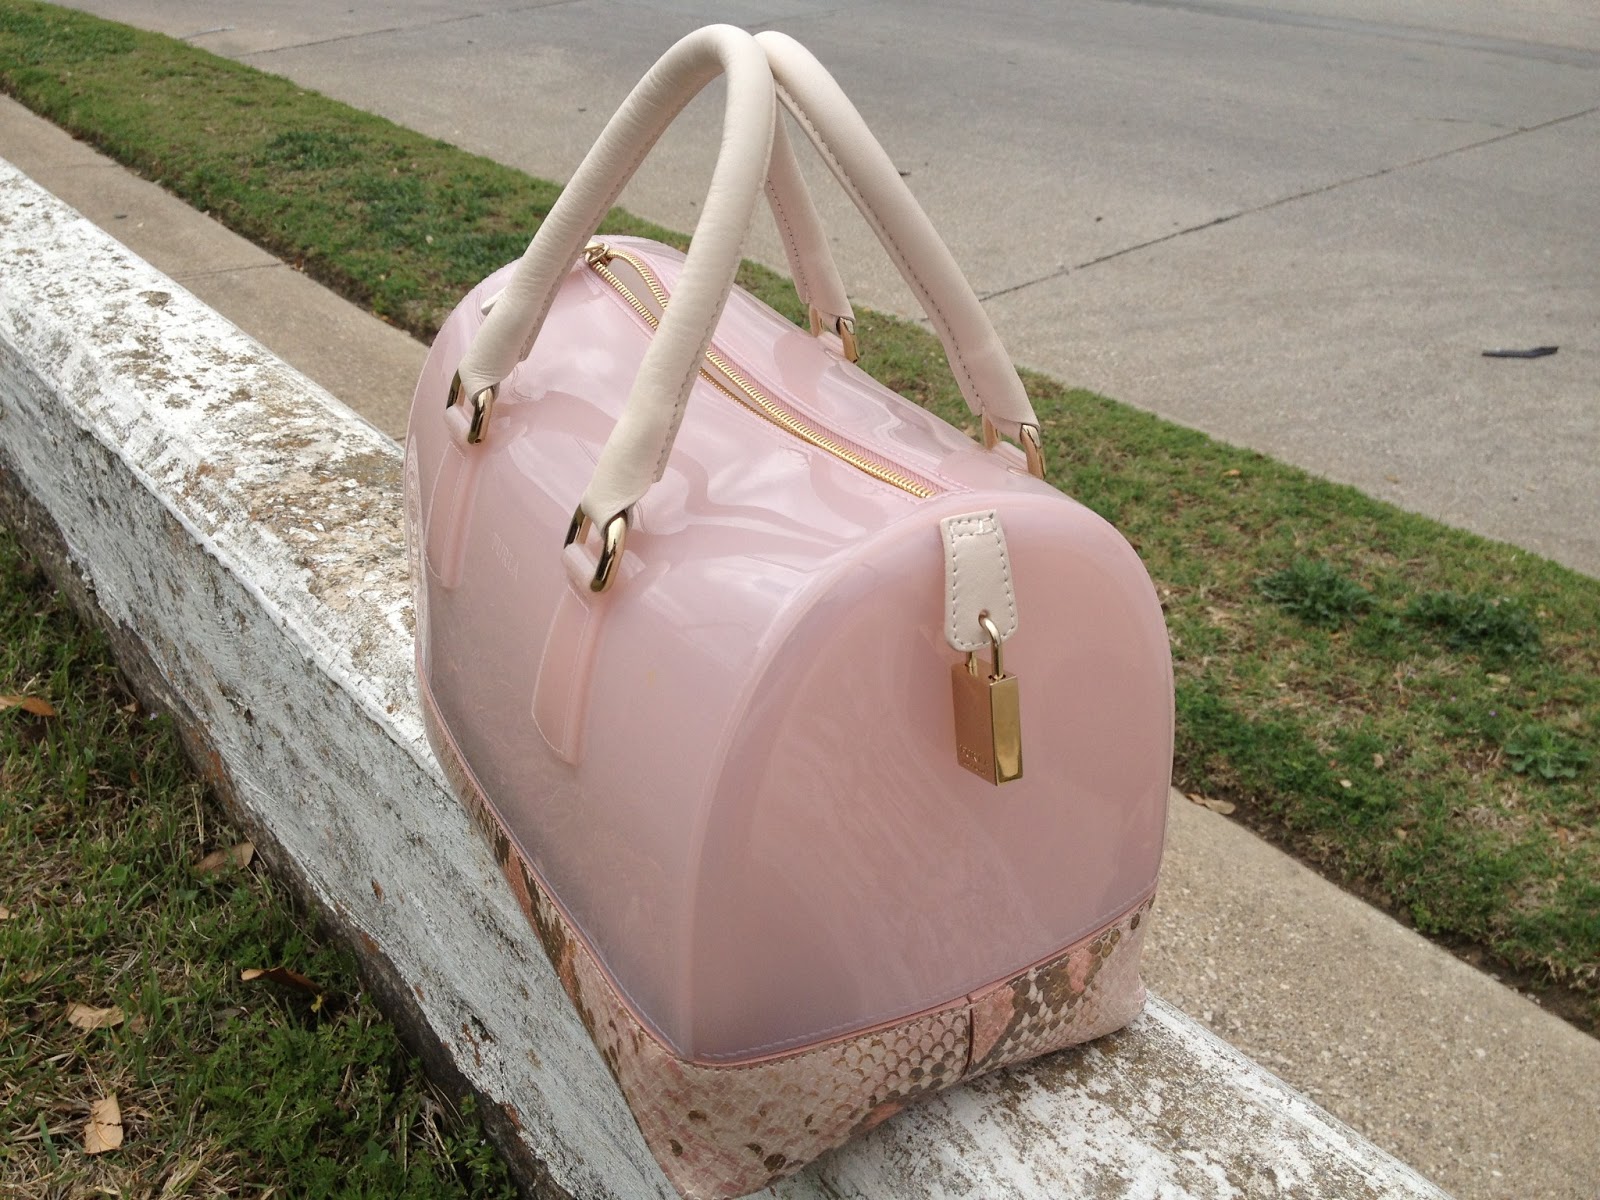 Handbag Review: Furla Candy Bag with Leather | Daydreaming